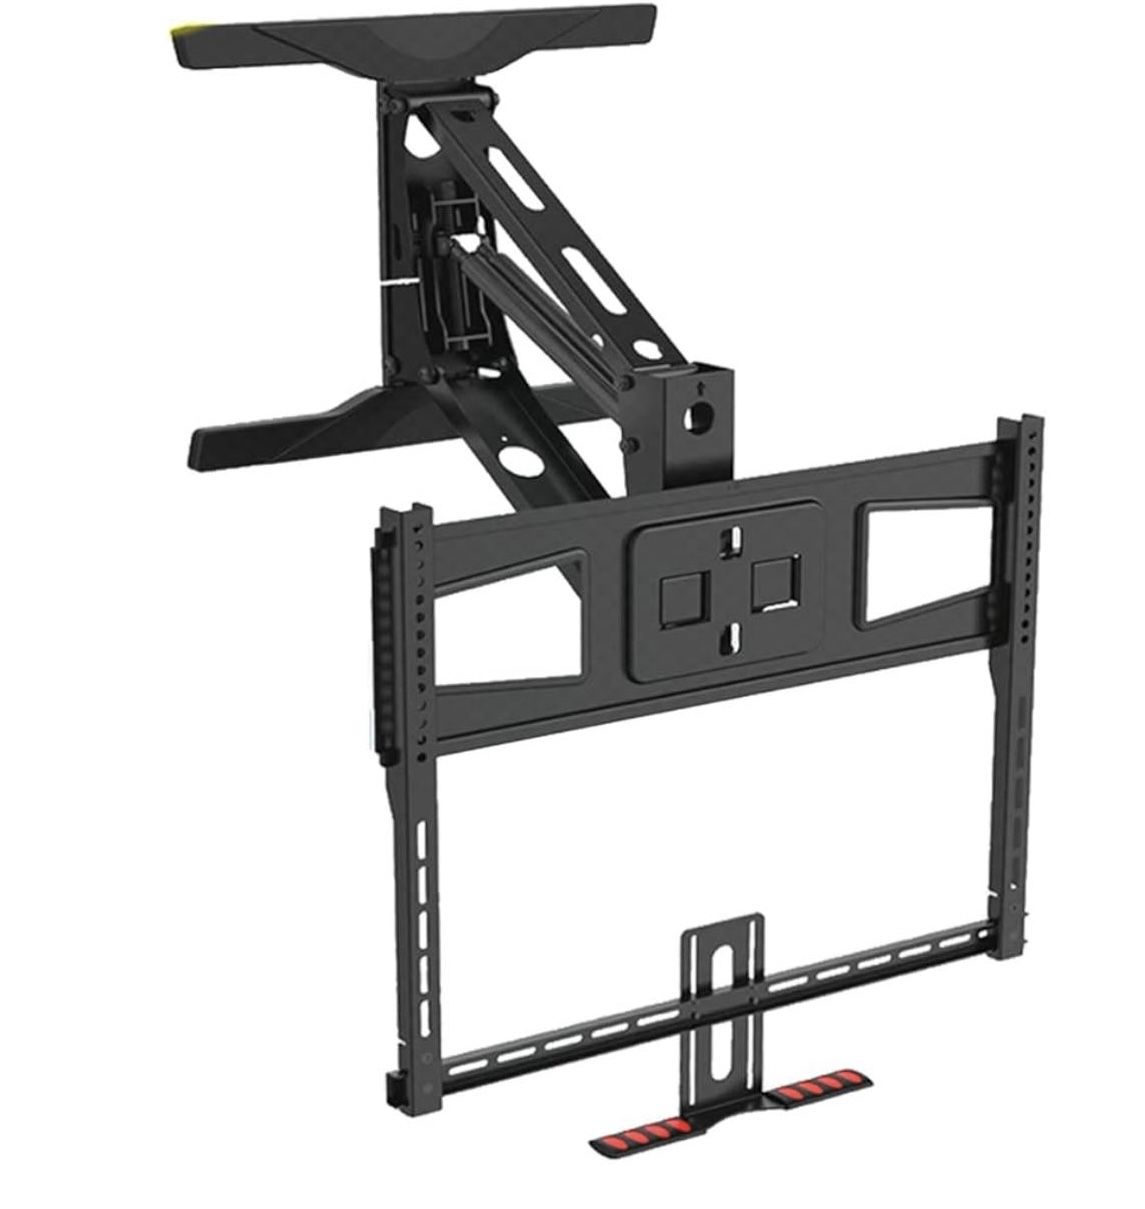 Monoprice Above Fireplace Pull-Down Full-Motion Articulating TV Wall Mount Bracket - for TVs 55in to 100in Max Weight 154lbs VESA Patterns Up to 800x4